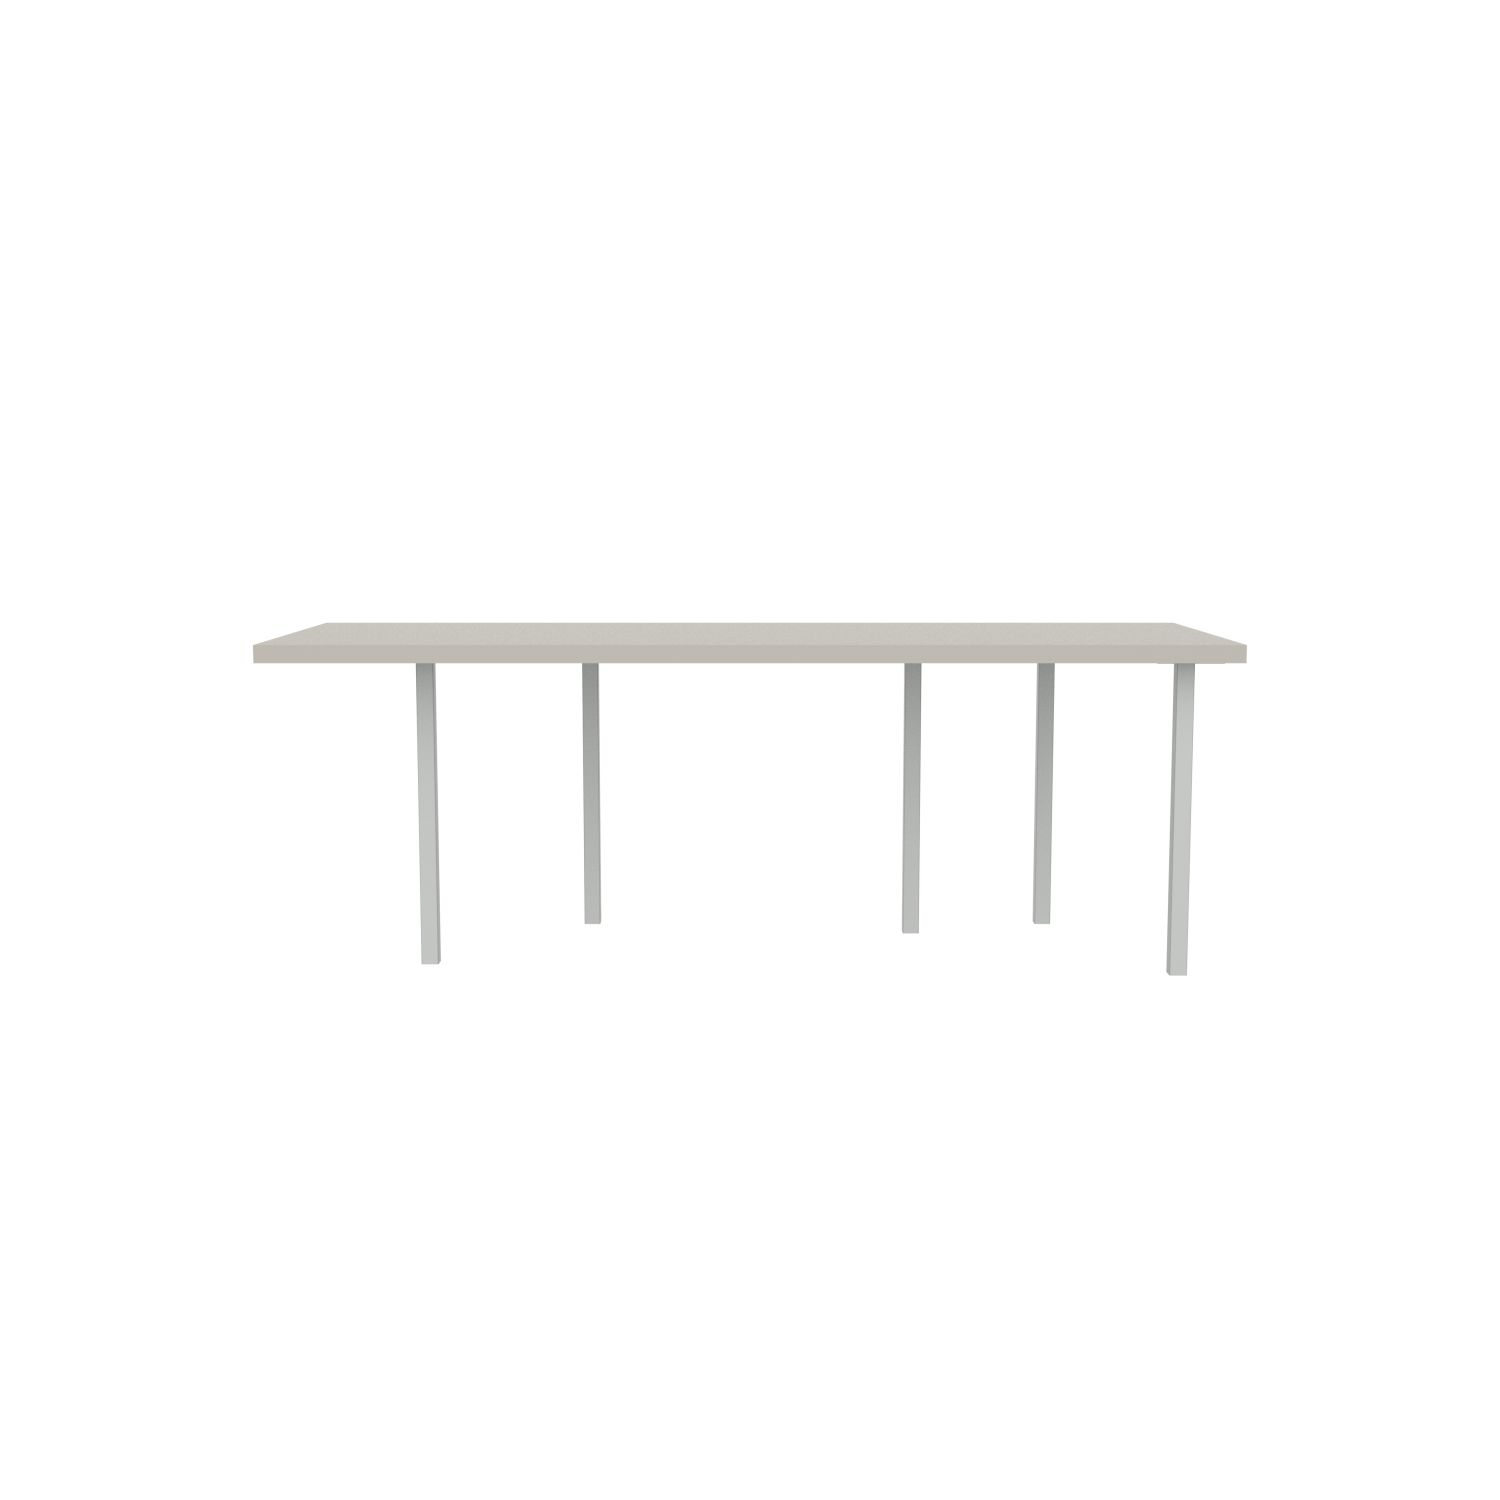 lensvelt bbrand table five fixed heigt 80x218 hpl white 50 mm price level 1 light grey ral7035